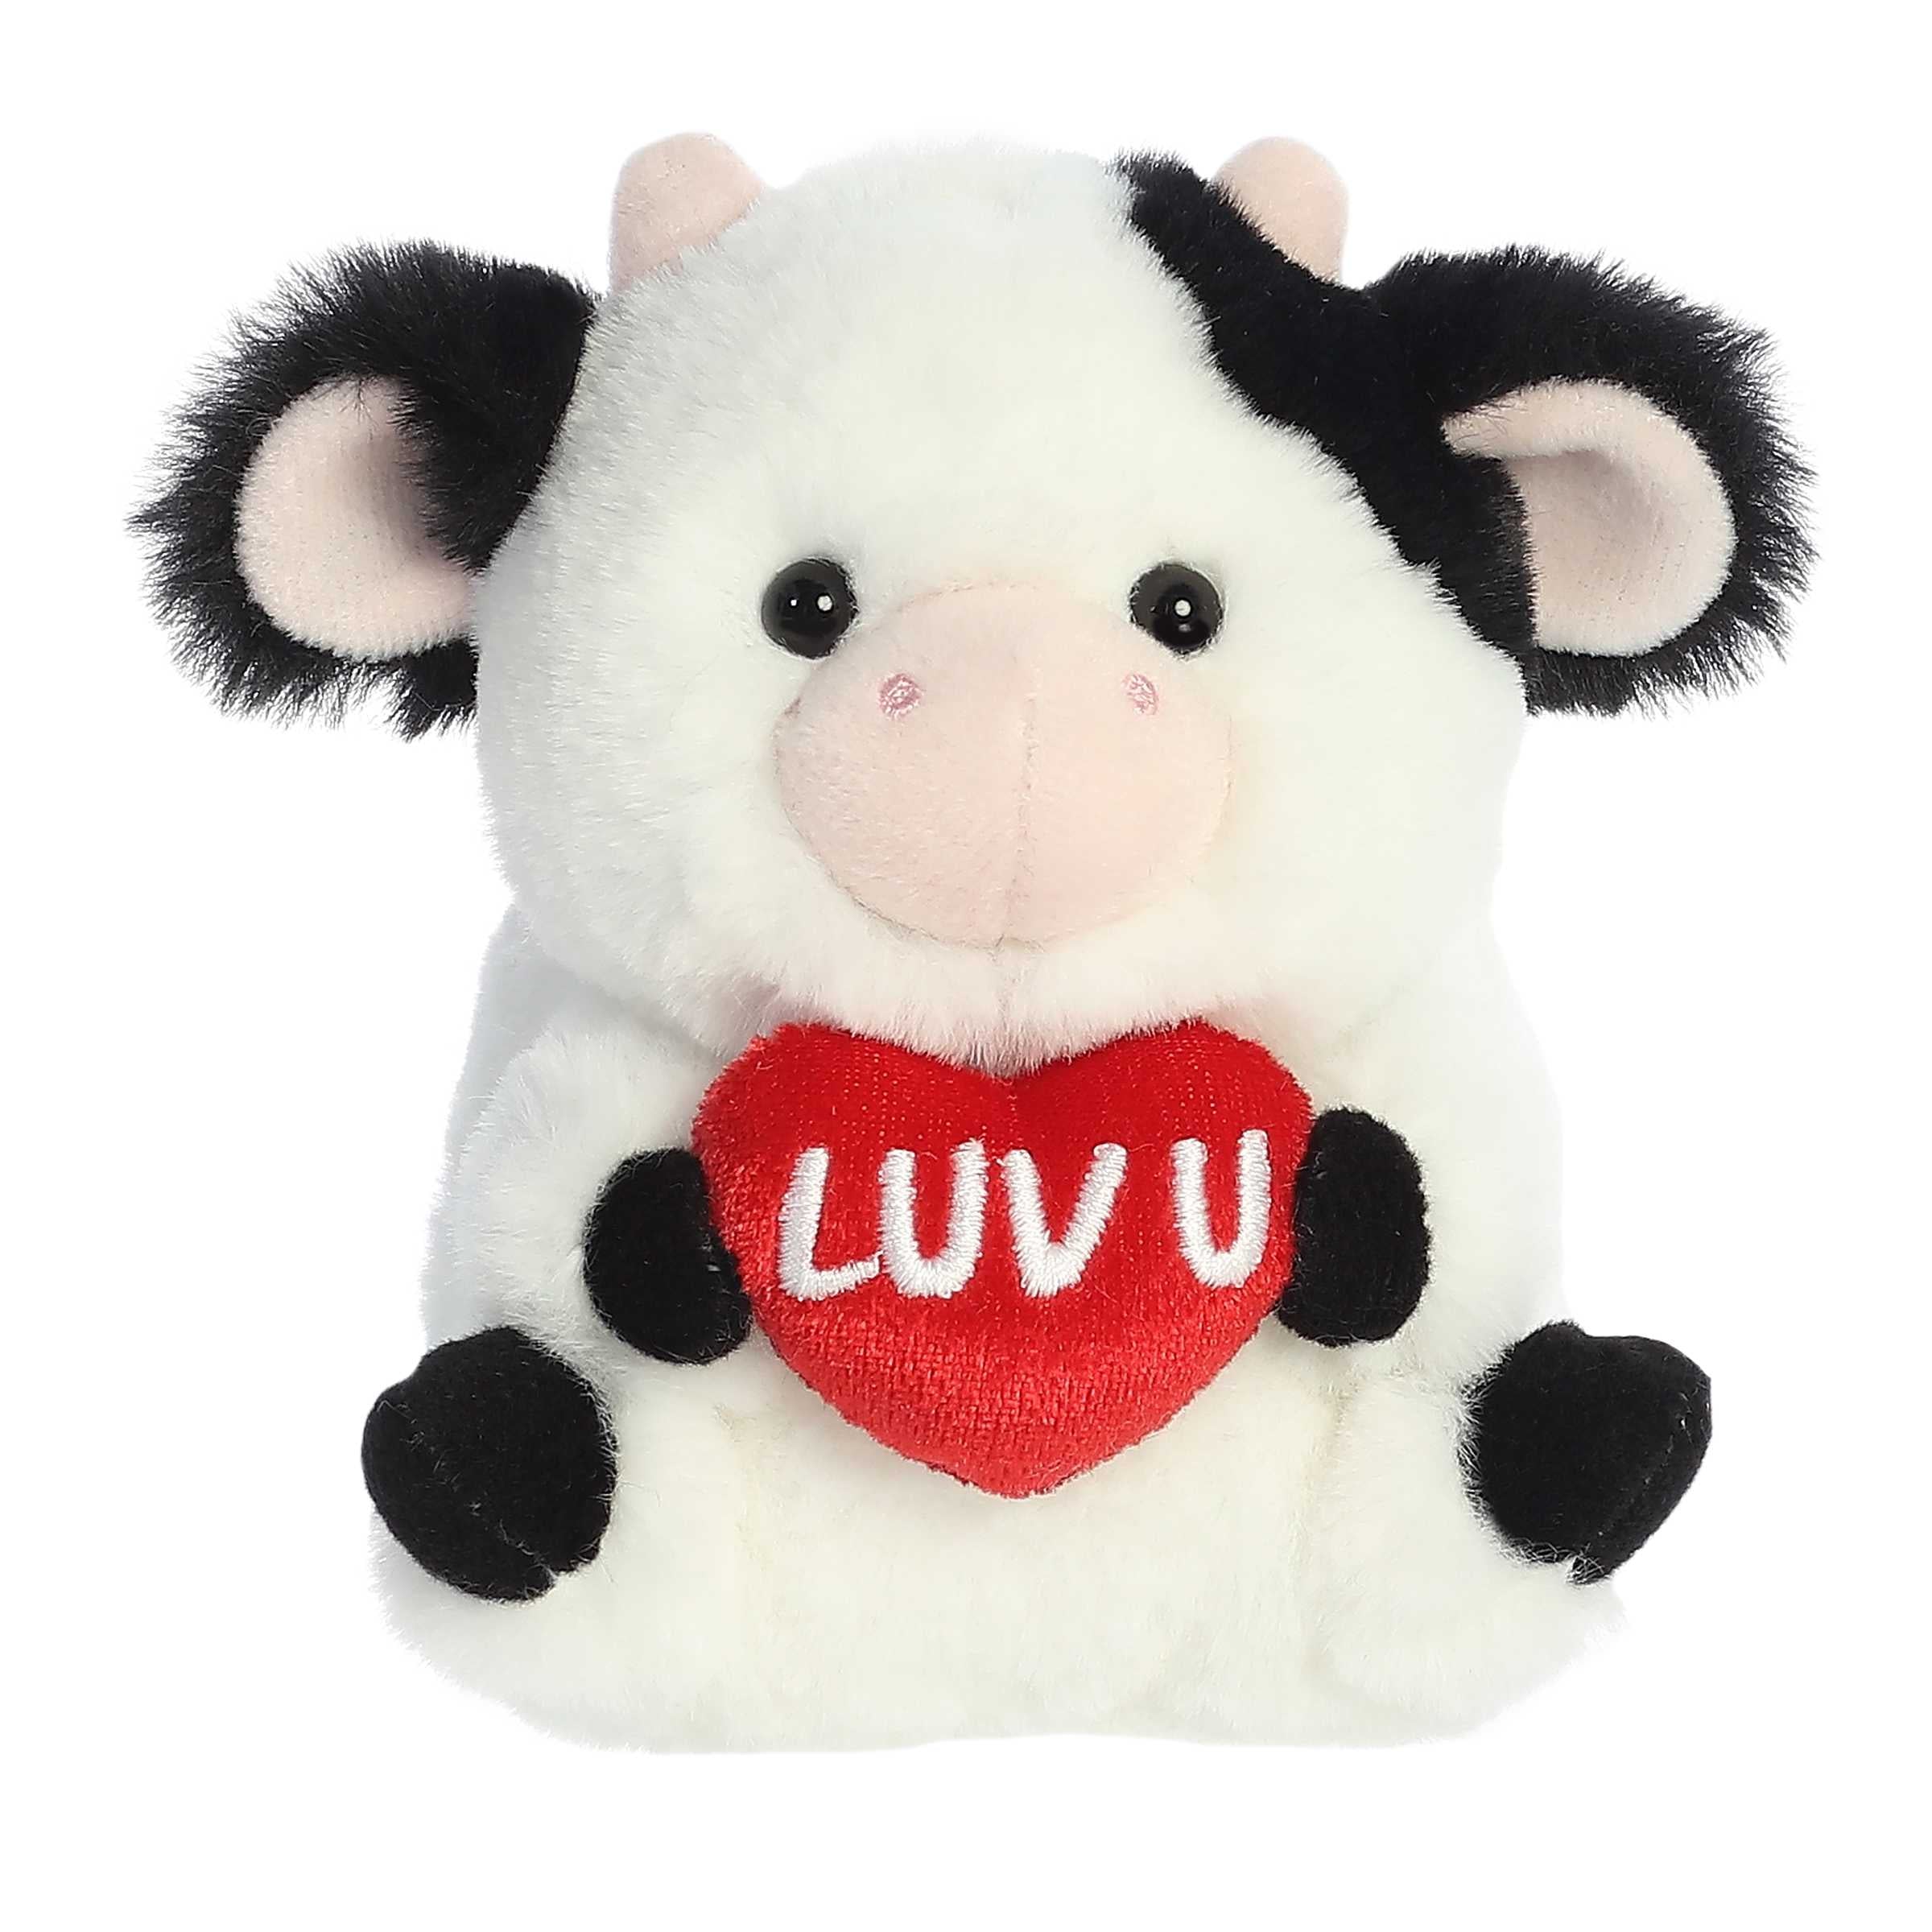 Adorable Cow plush from Rolly Pets collection, poised playfully on its back with a ‘Luv U’ heart, ready to share love.